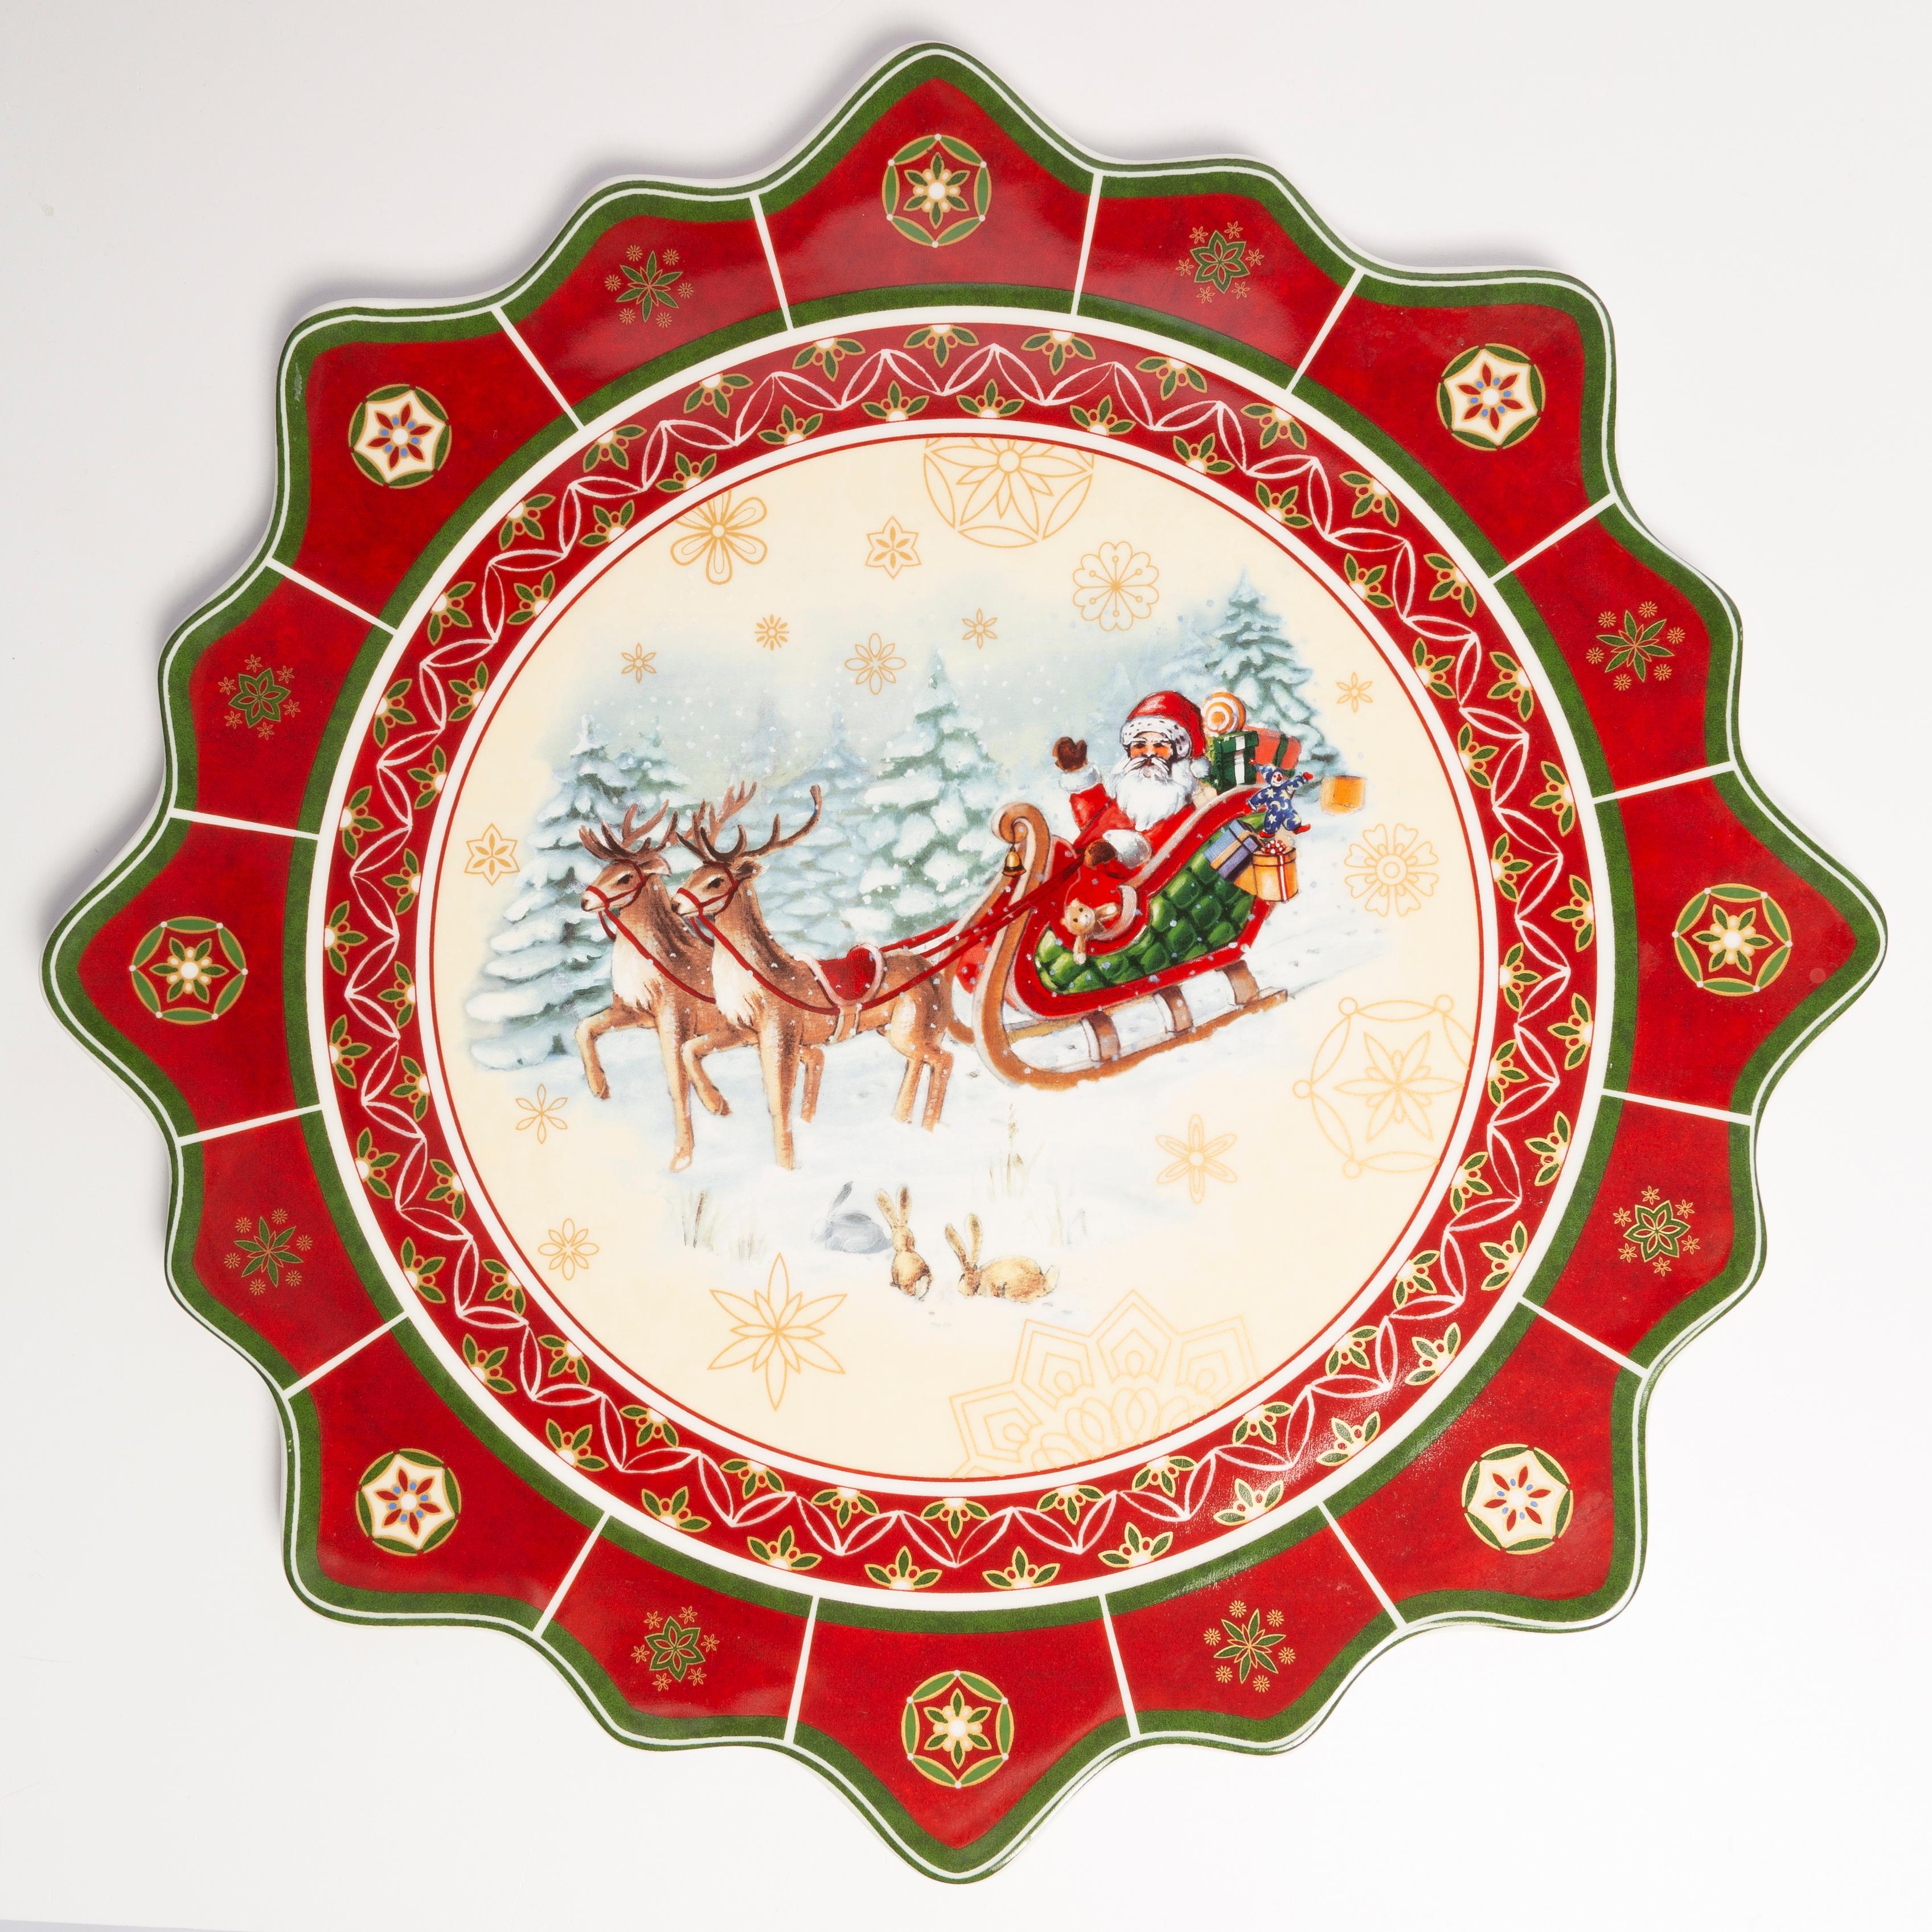 The Toy's Delight round plate from Villeroy&Boch with a diameter of 44 cm is perfect for serving snacks, cakes, fish or cold cuts. A large platter with decorative edges is decorated with Christmas motifs, i.e. Santa Claus, a rocking horse, a